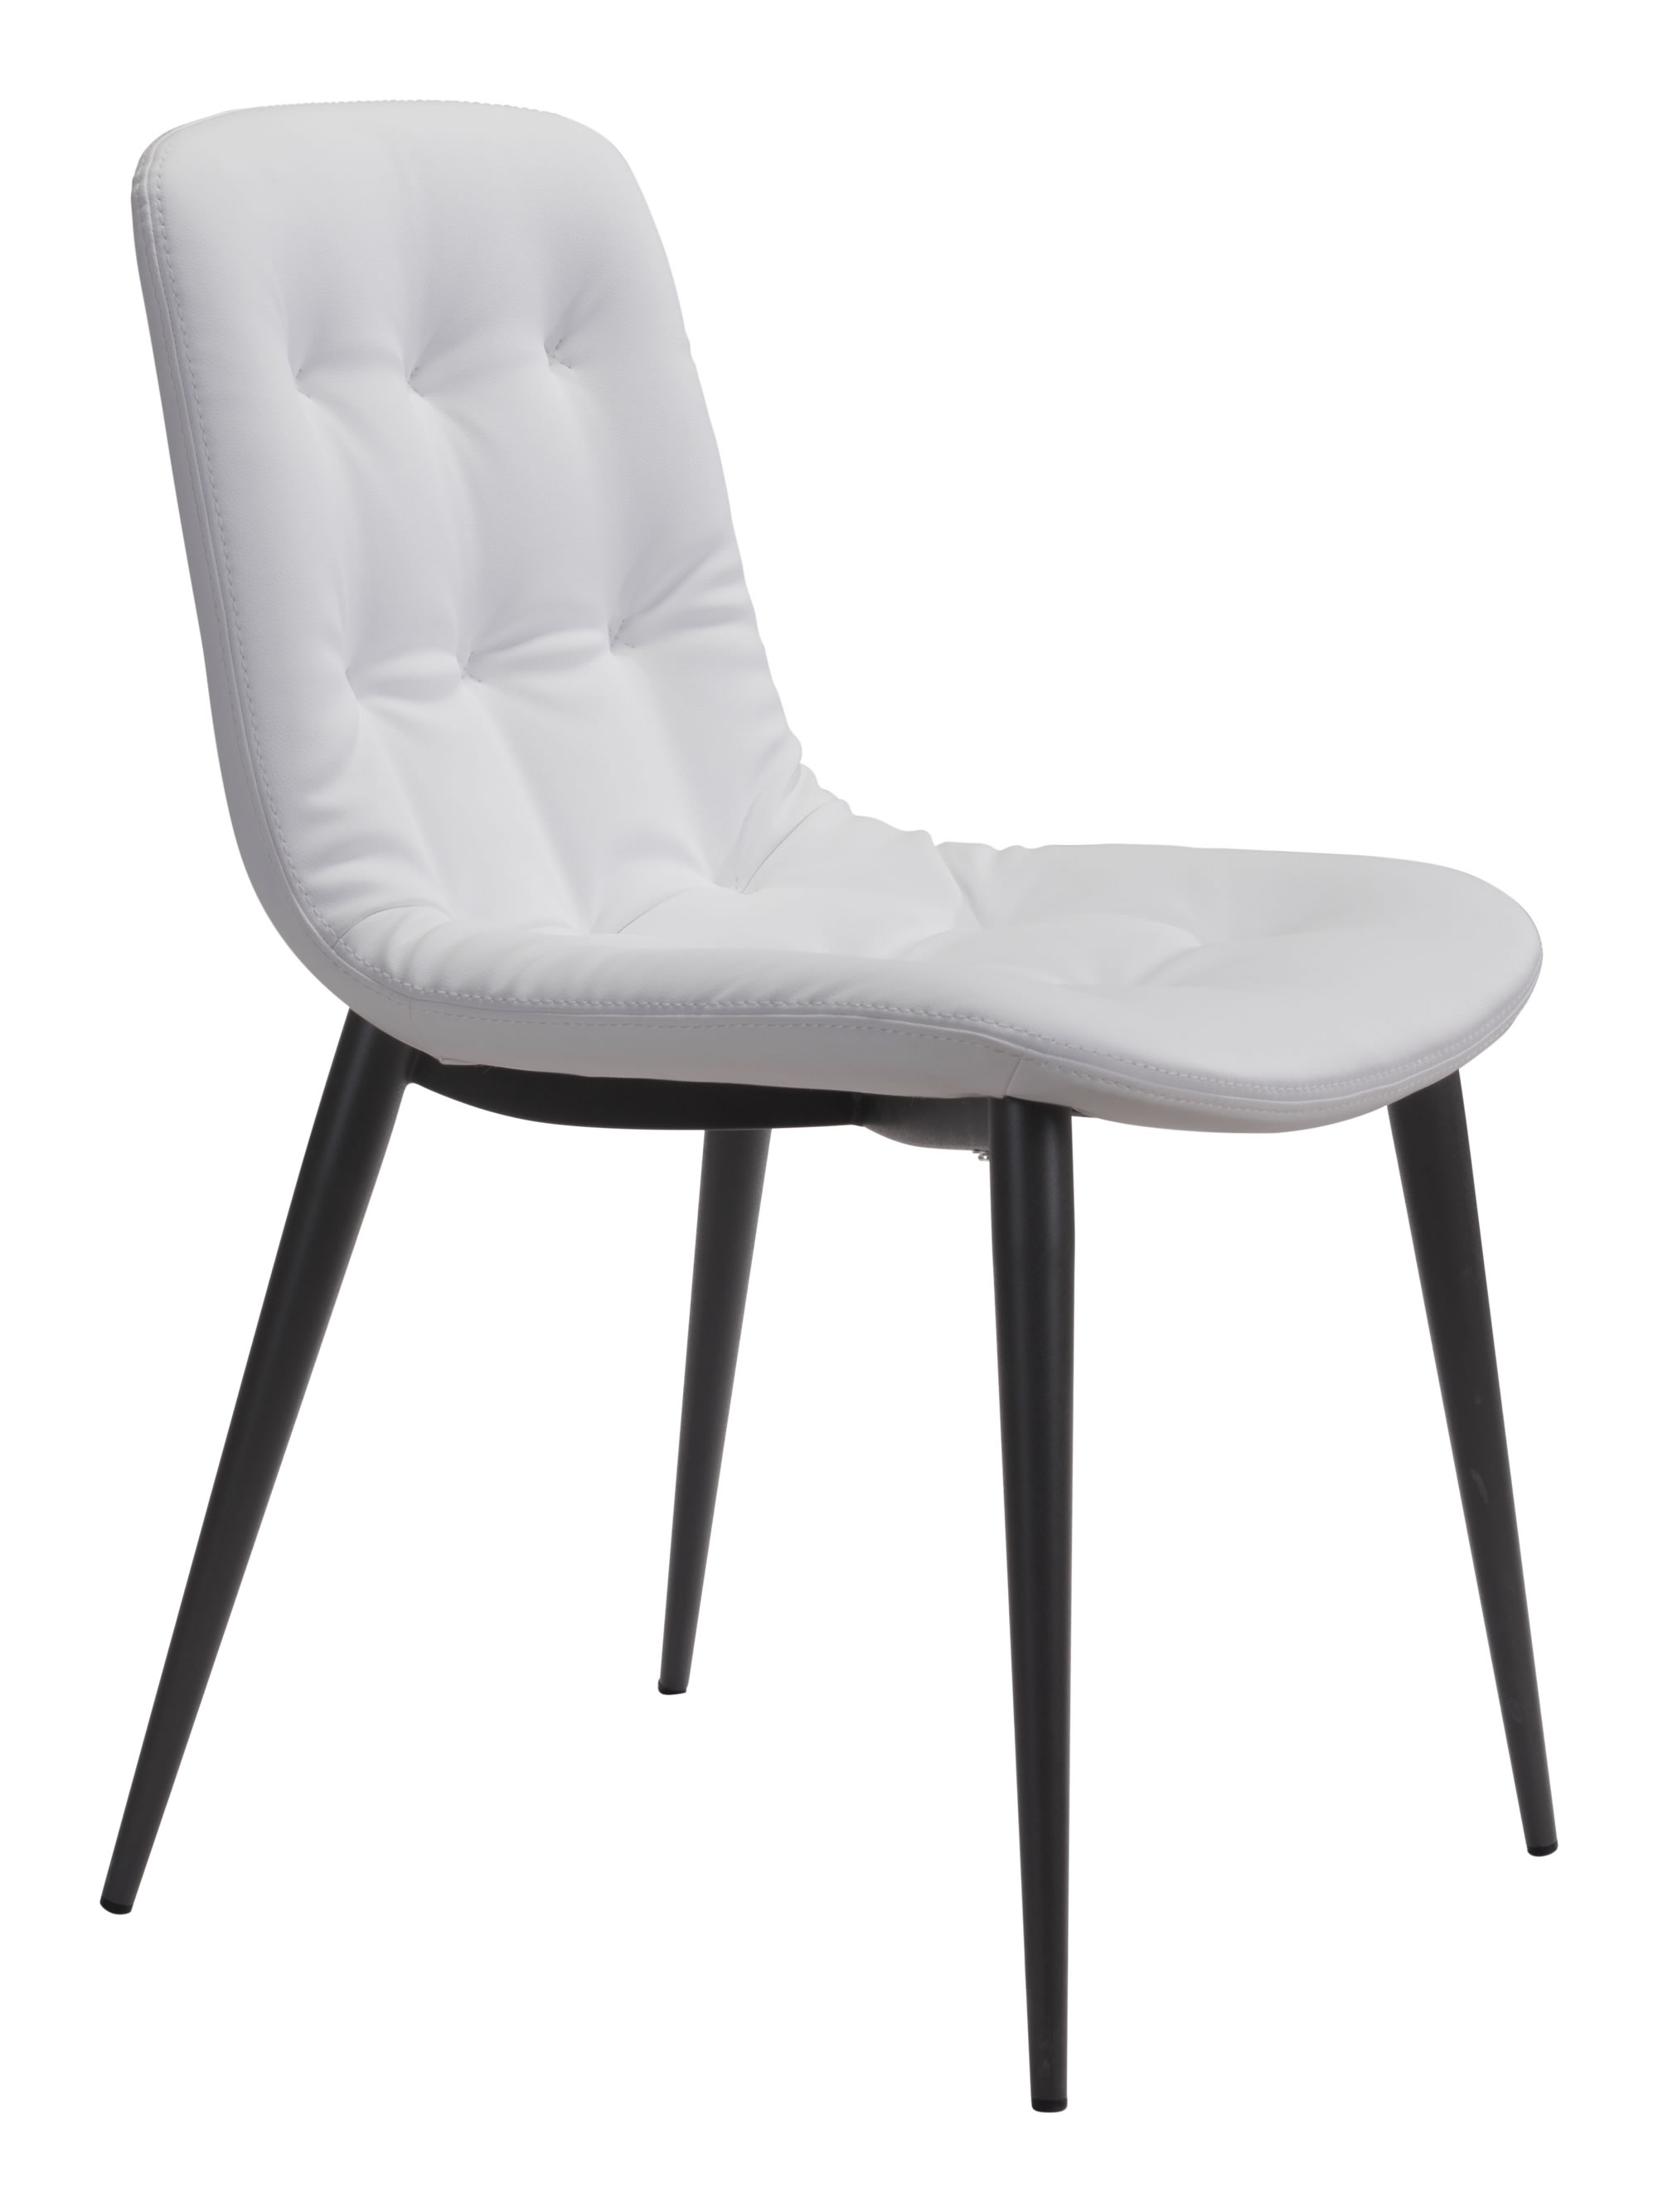 Faux Leather Tufted White Side Chairs Set of 2